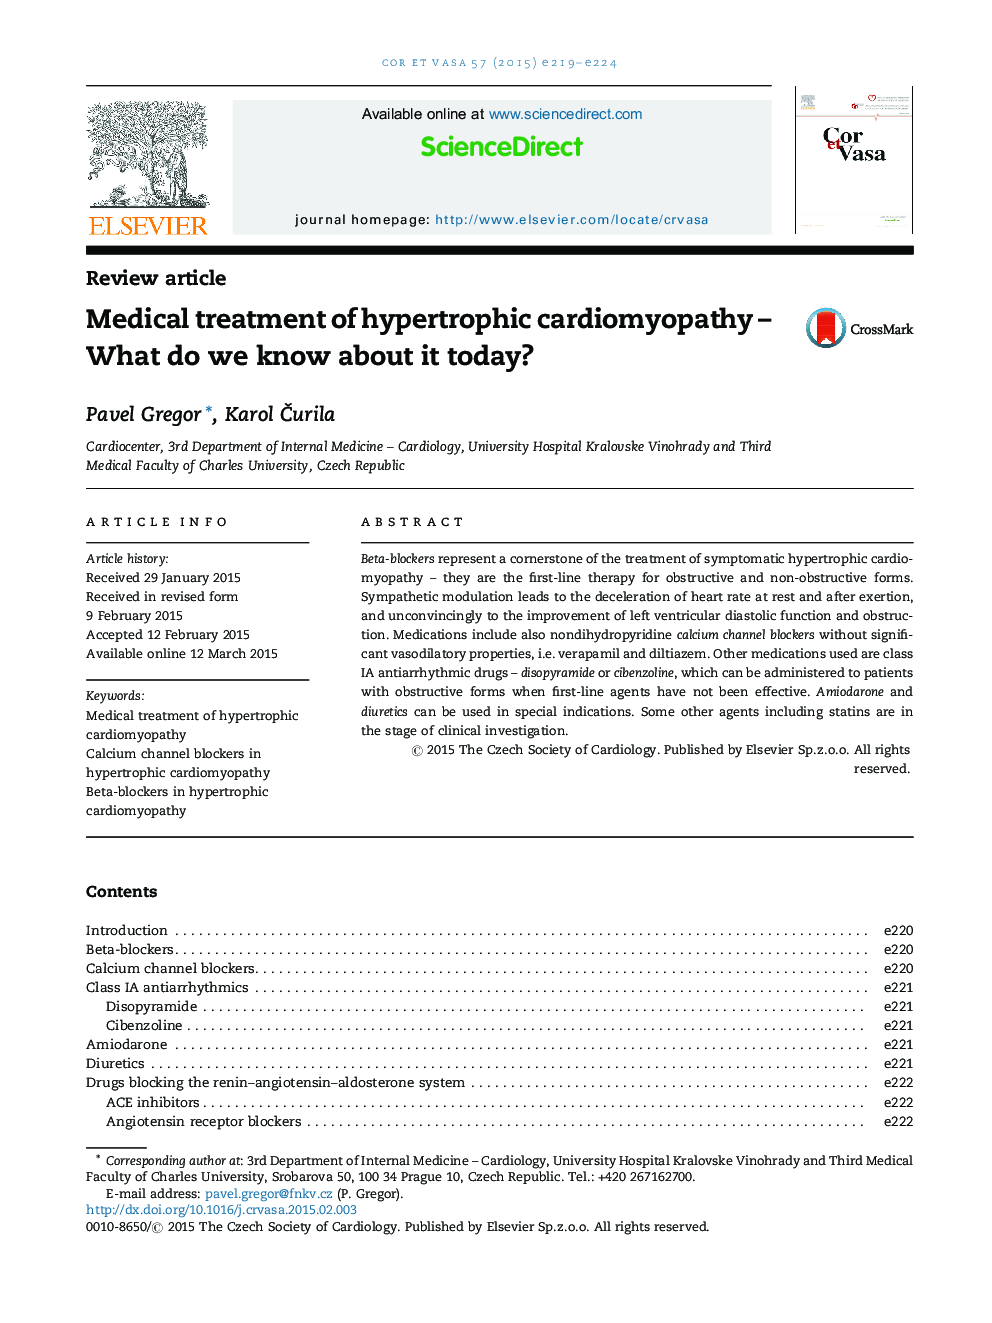 Medical treatment of hypertrophic cardiomyopathy – What do we know about it today?